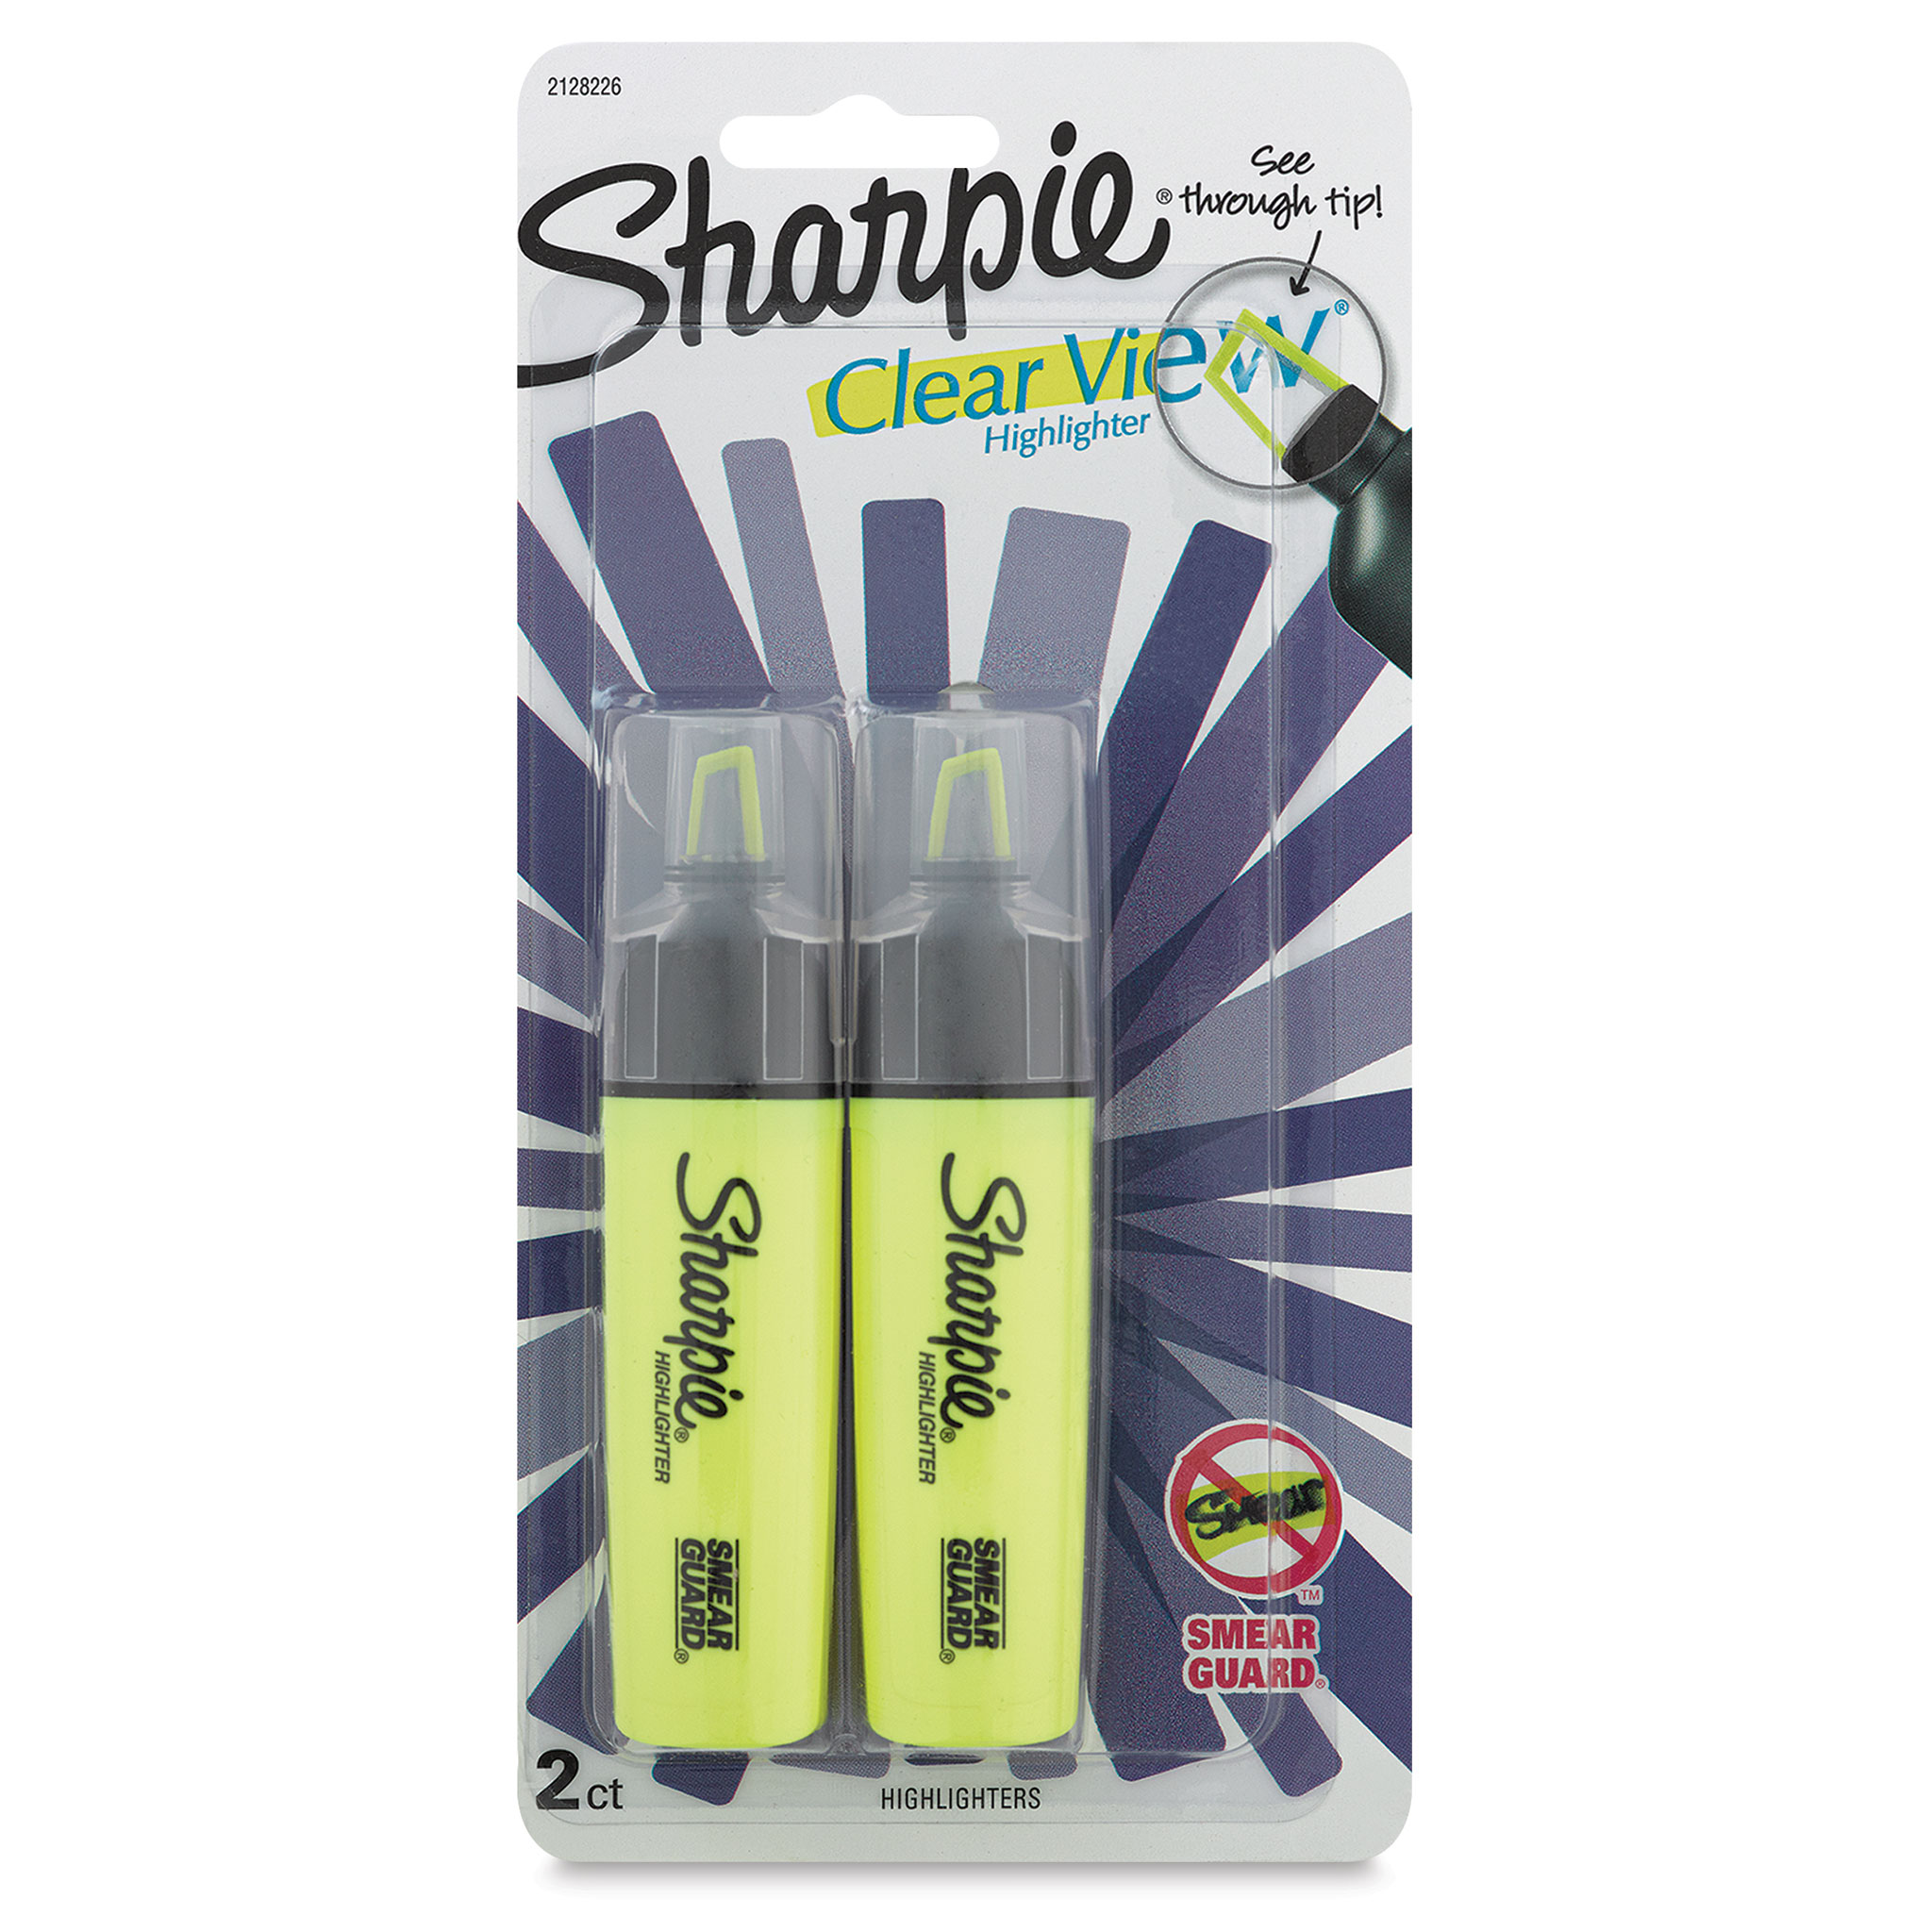 Sharpie Clear View Highlighters - Set of 4, Assorted Colors, Tank Style